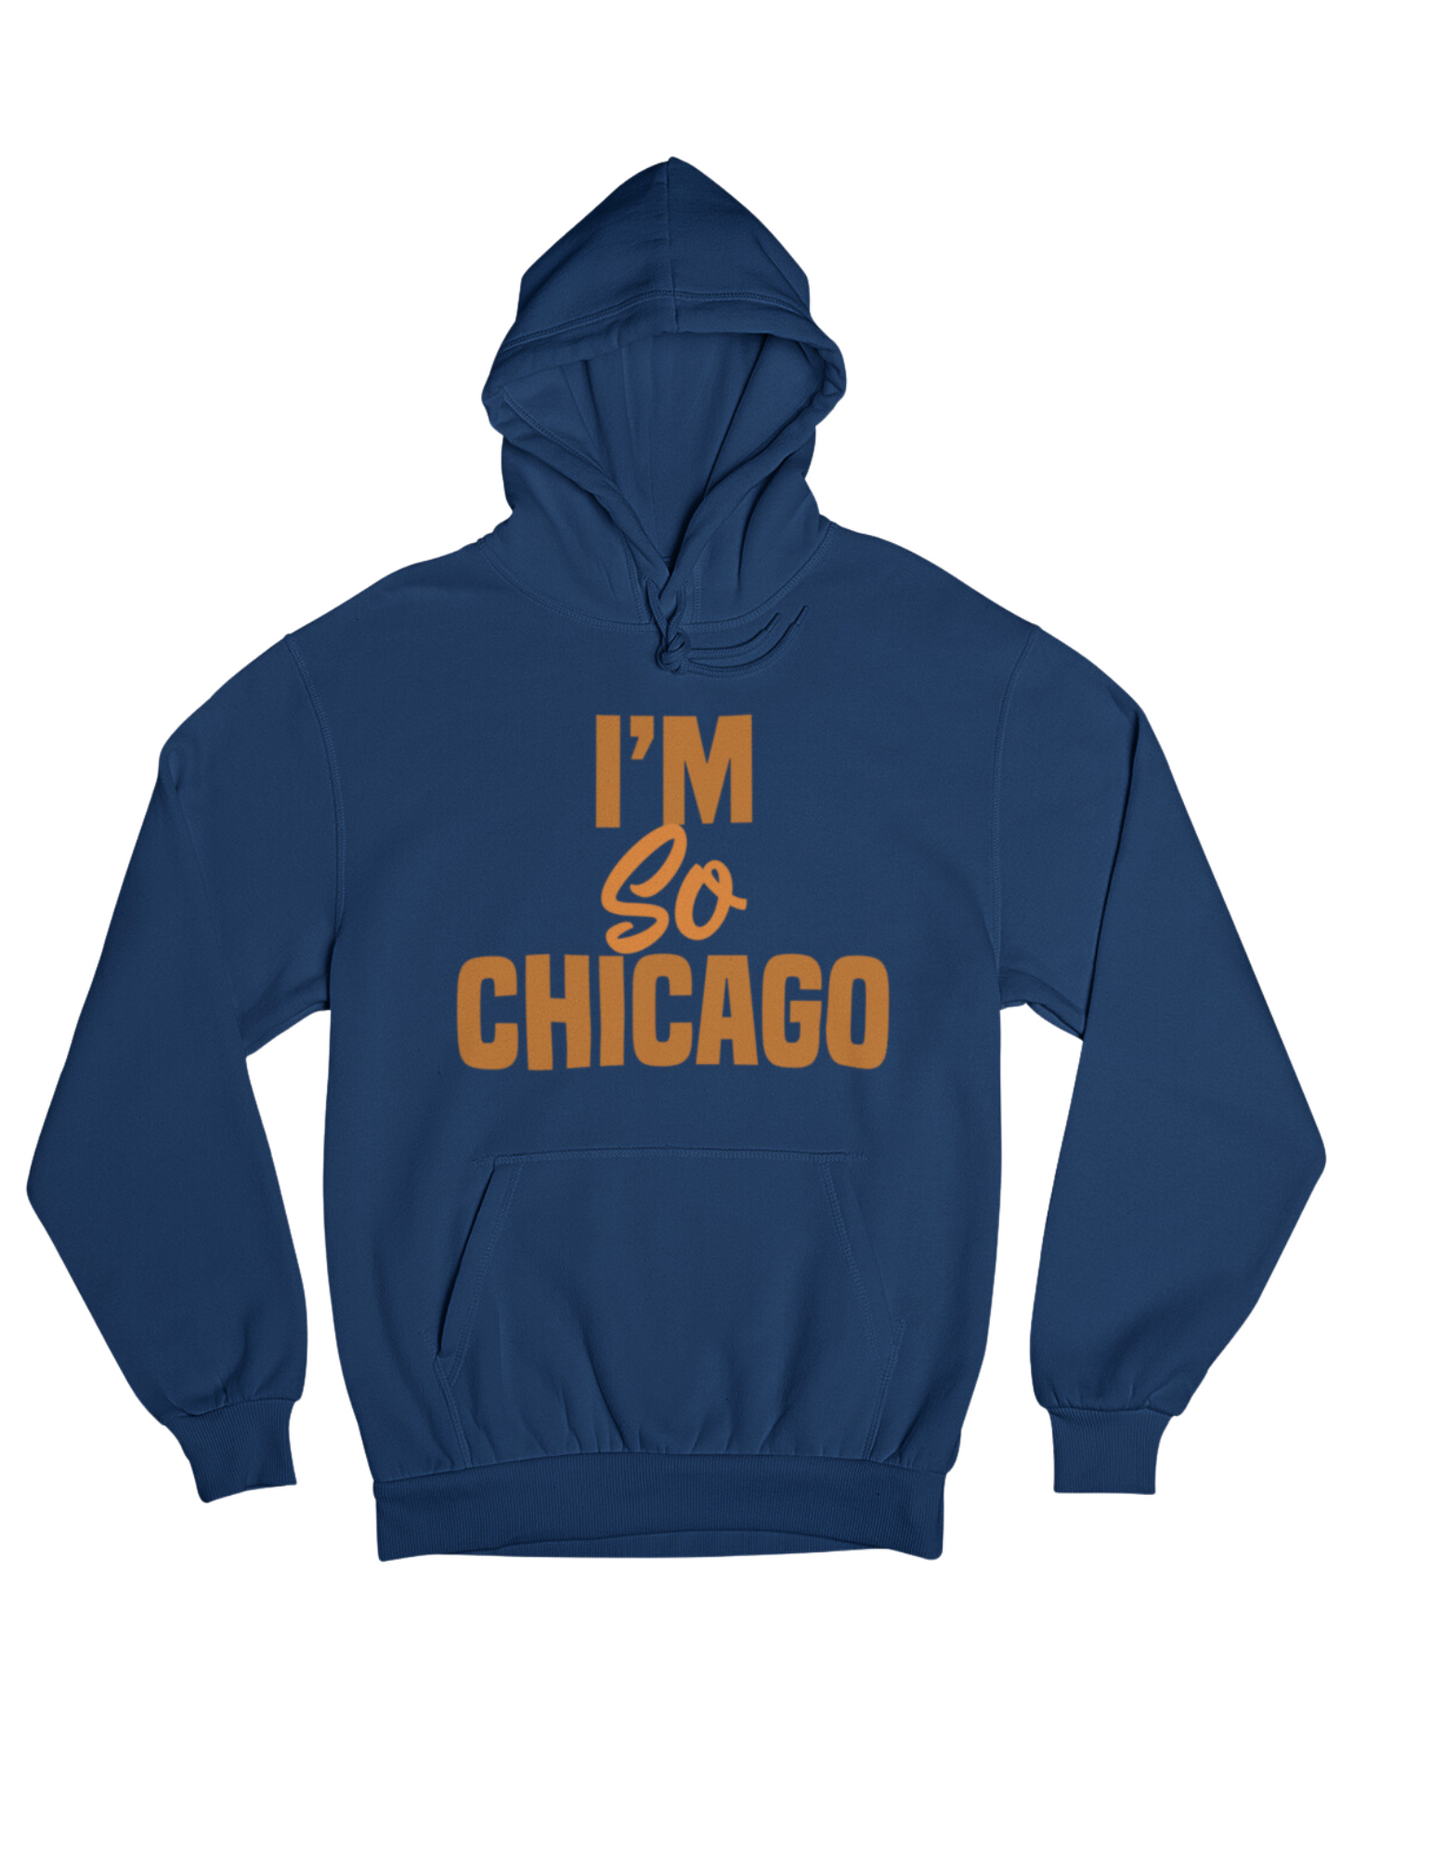 I'm So Chicago Hoodie (Limited Bears Edition)